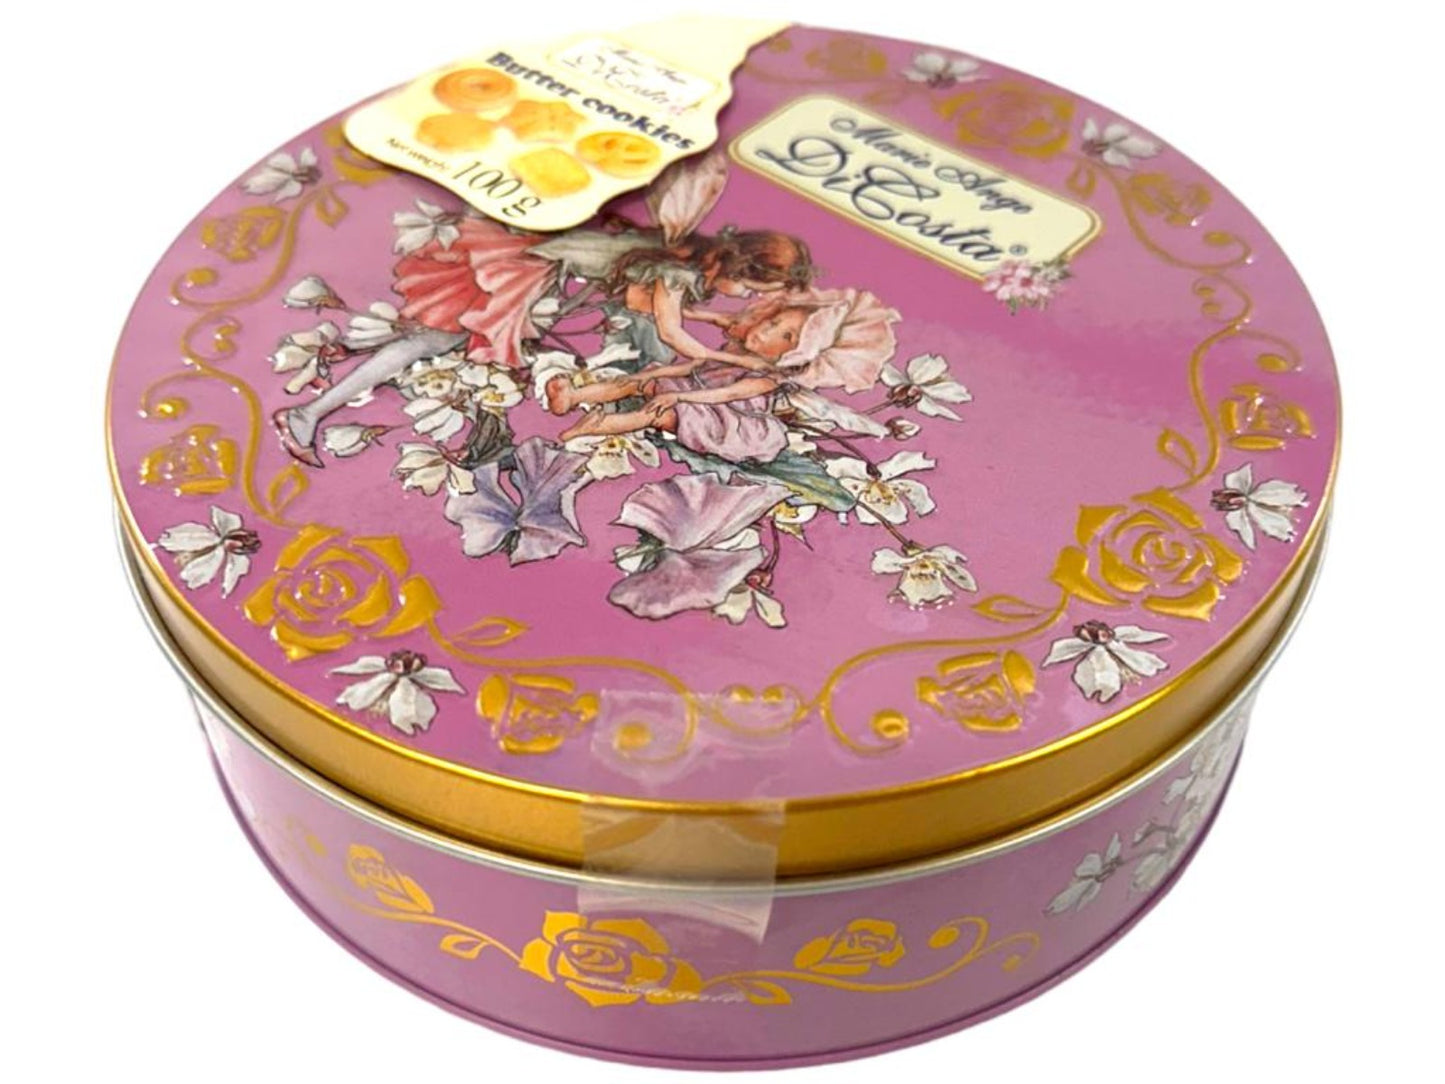 Marie Ange di Costa Flower Fairy Italian Butter Cookies—Il Girotondo in Pink 100g